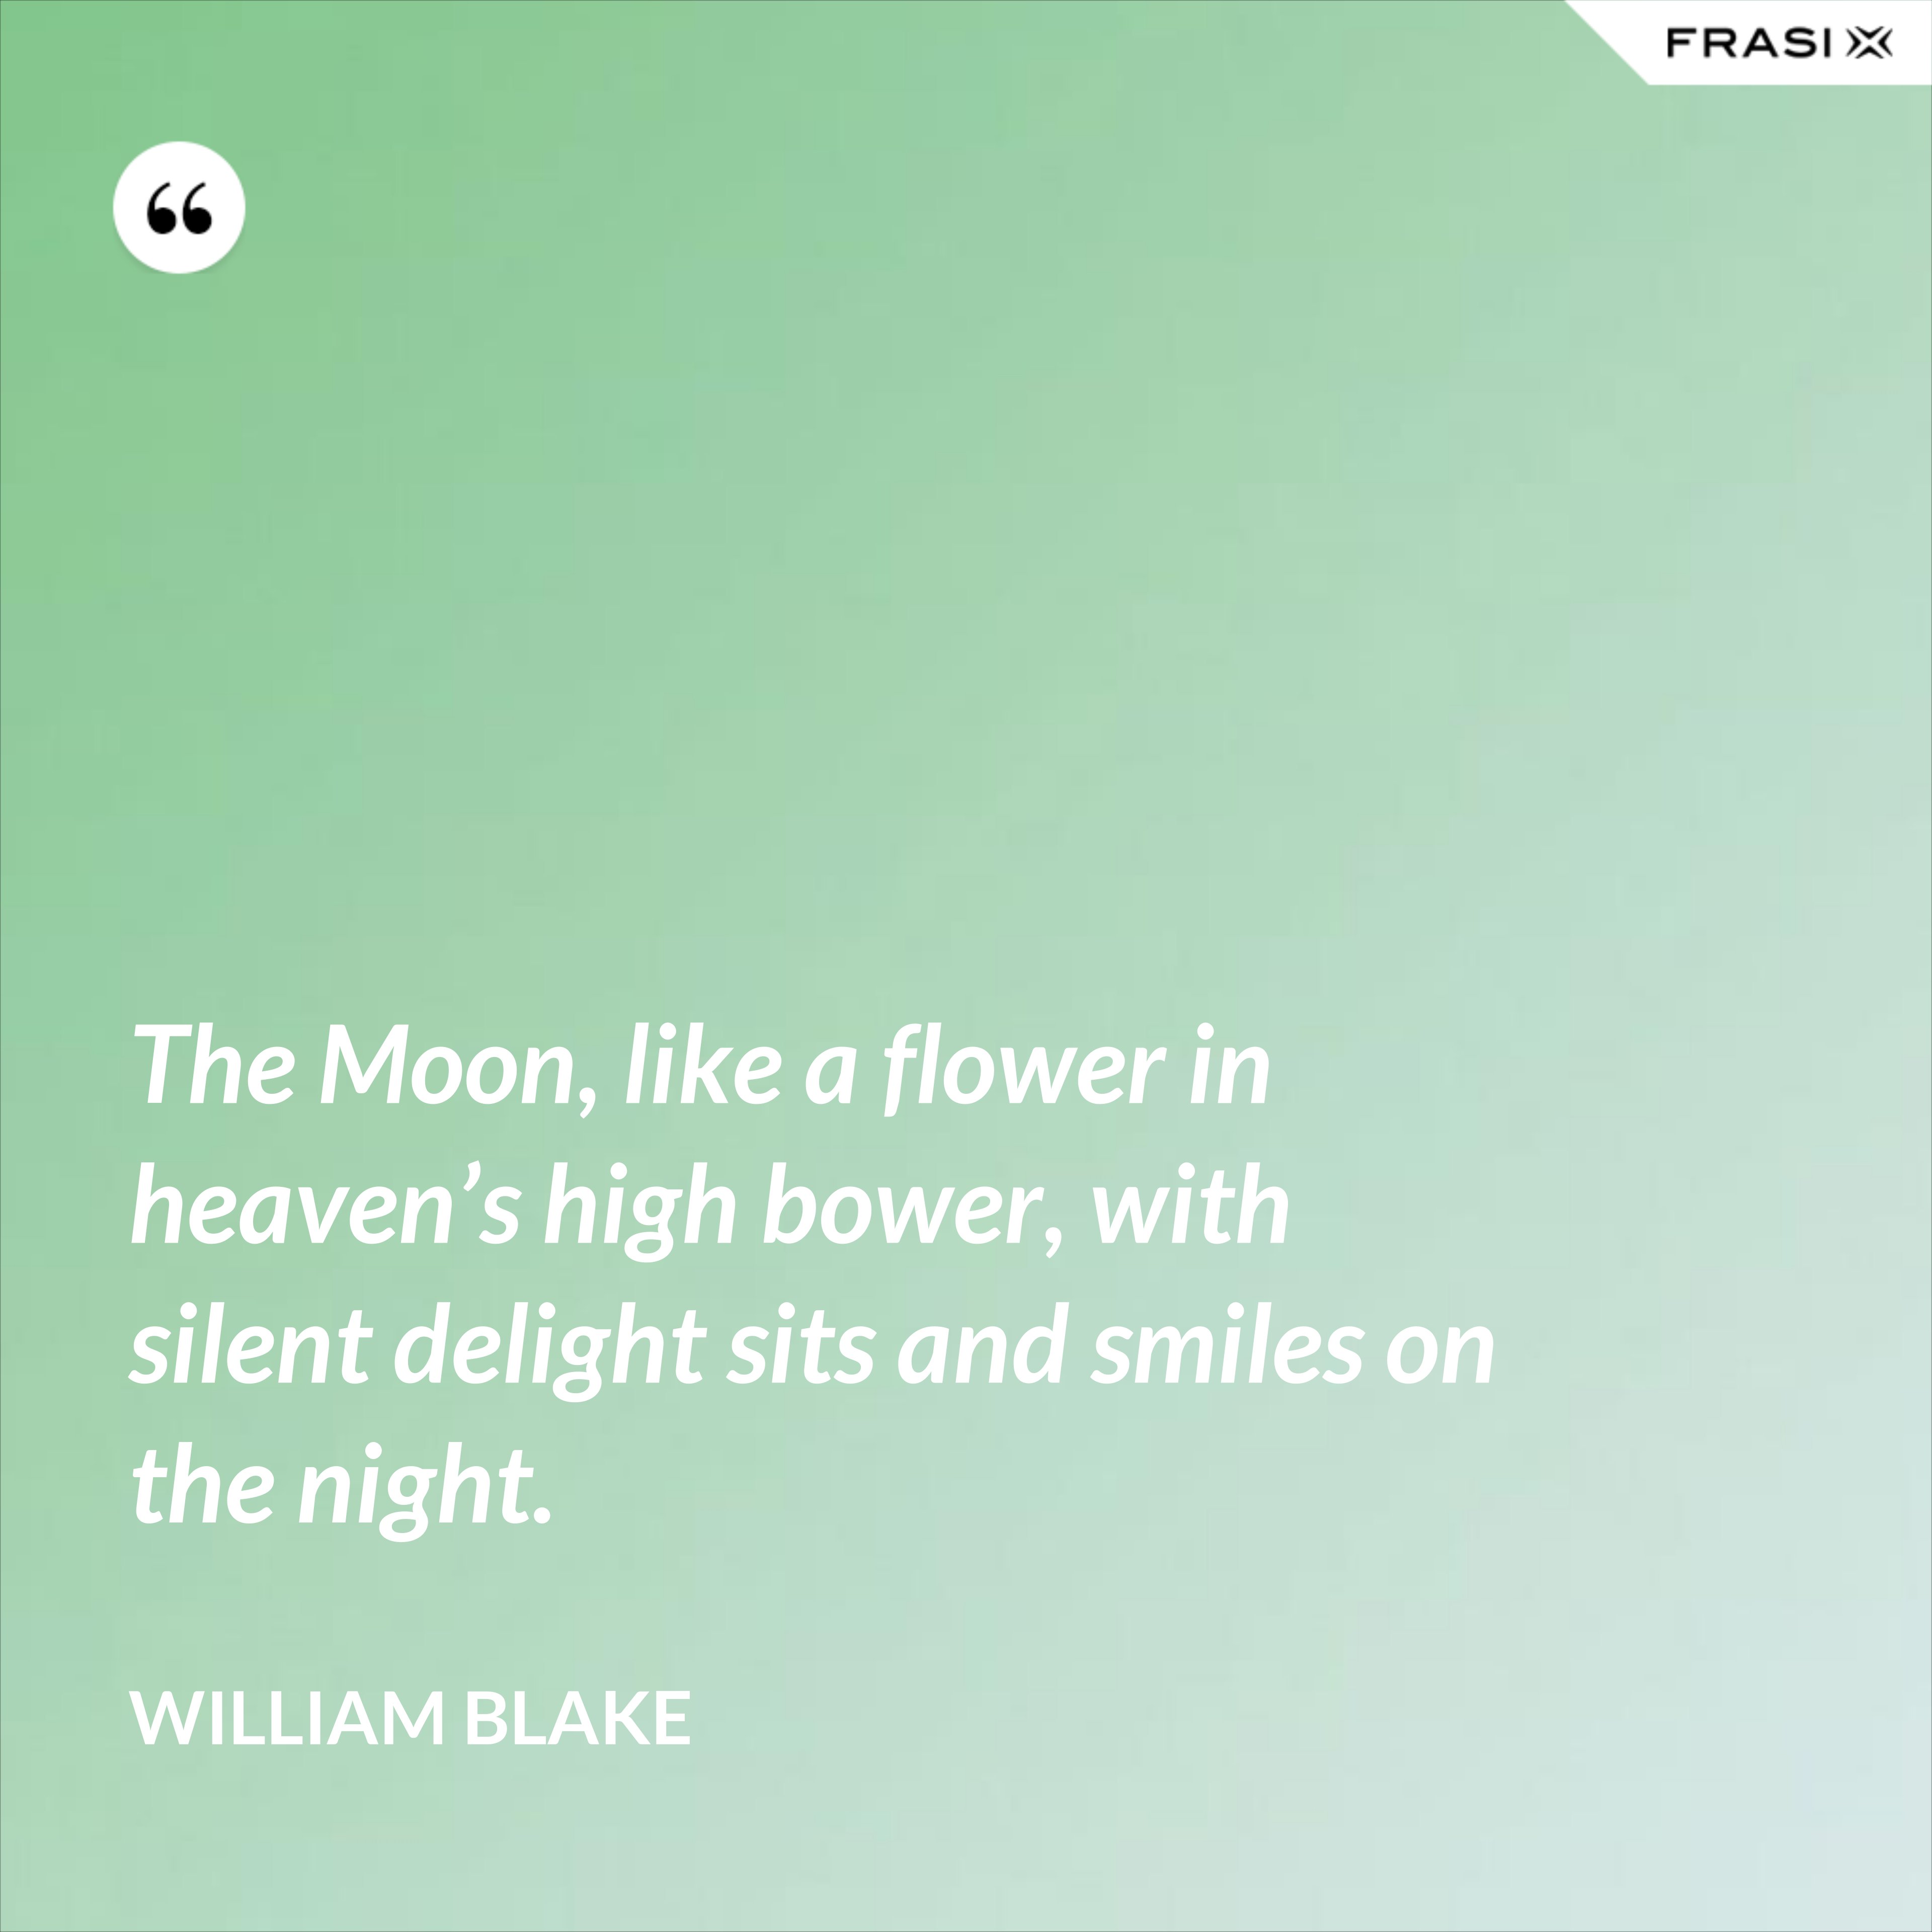 The Moon, like a flower in heaven’s high bower, with silent delight sits and smiles on the night. - William Blake